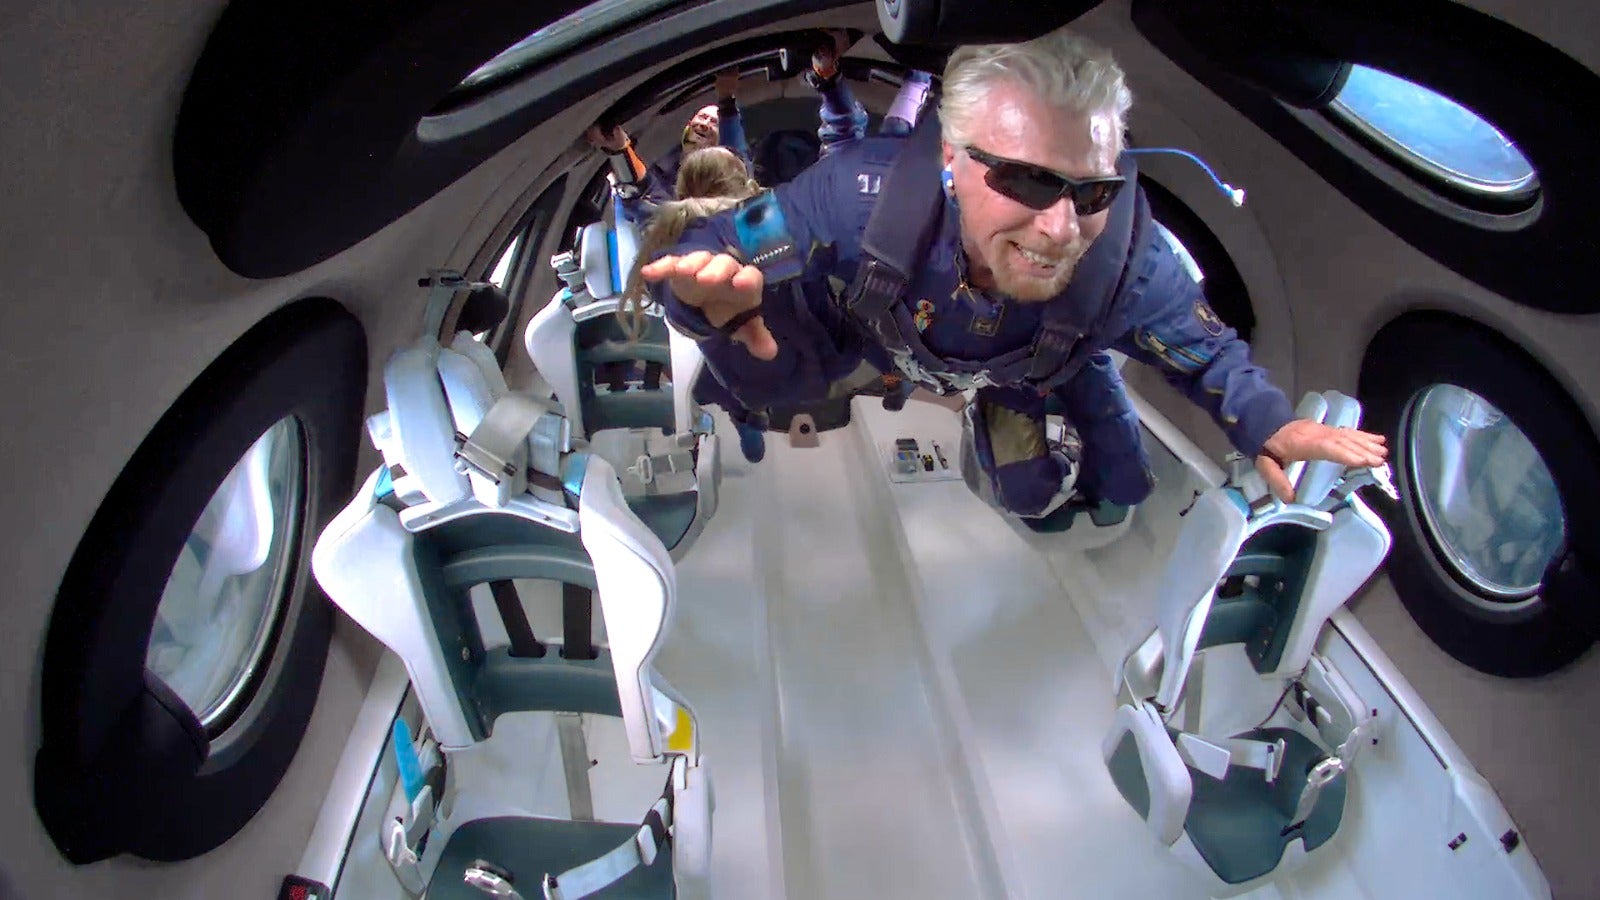 Richard Branson experiencing weightlessness during his trip to space on July 11, 2021. (Photo: Virgin Galactic)